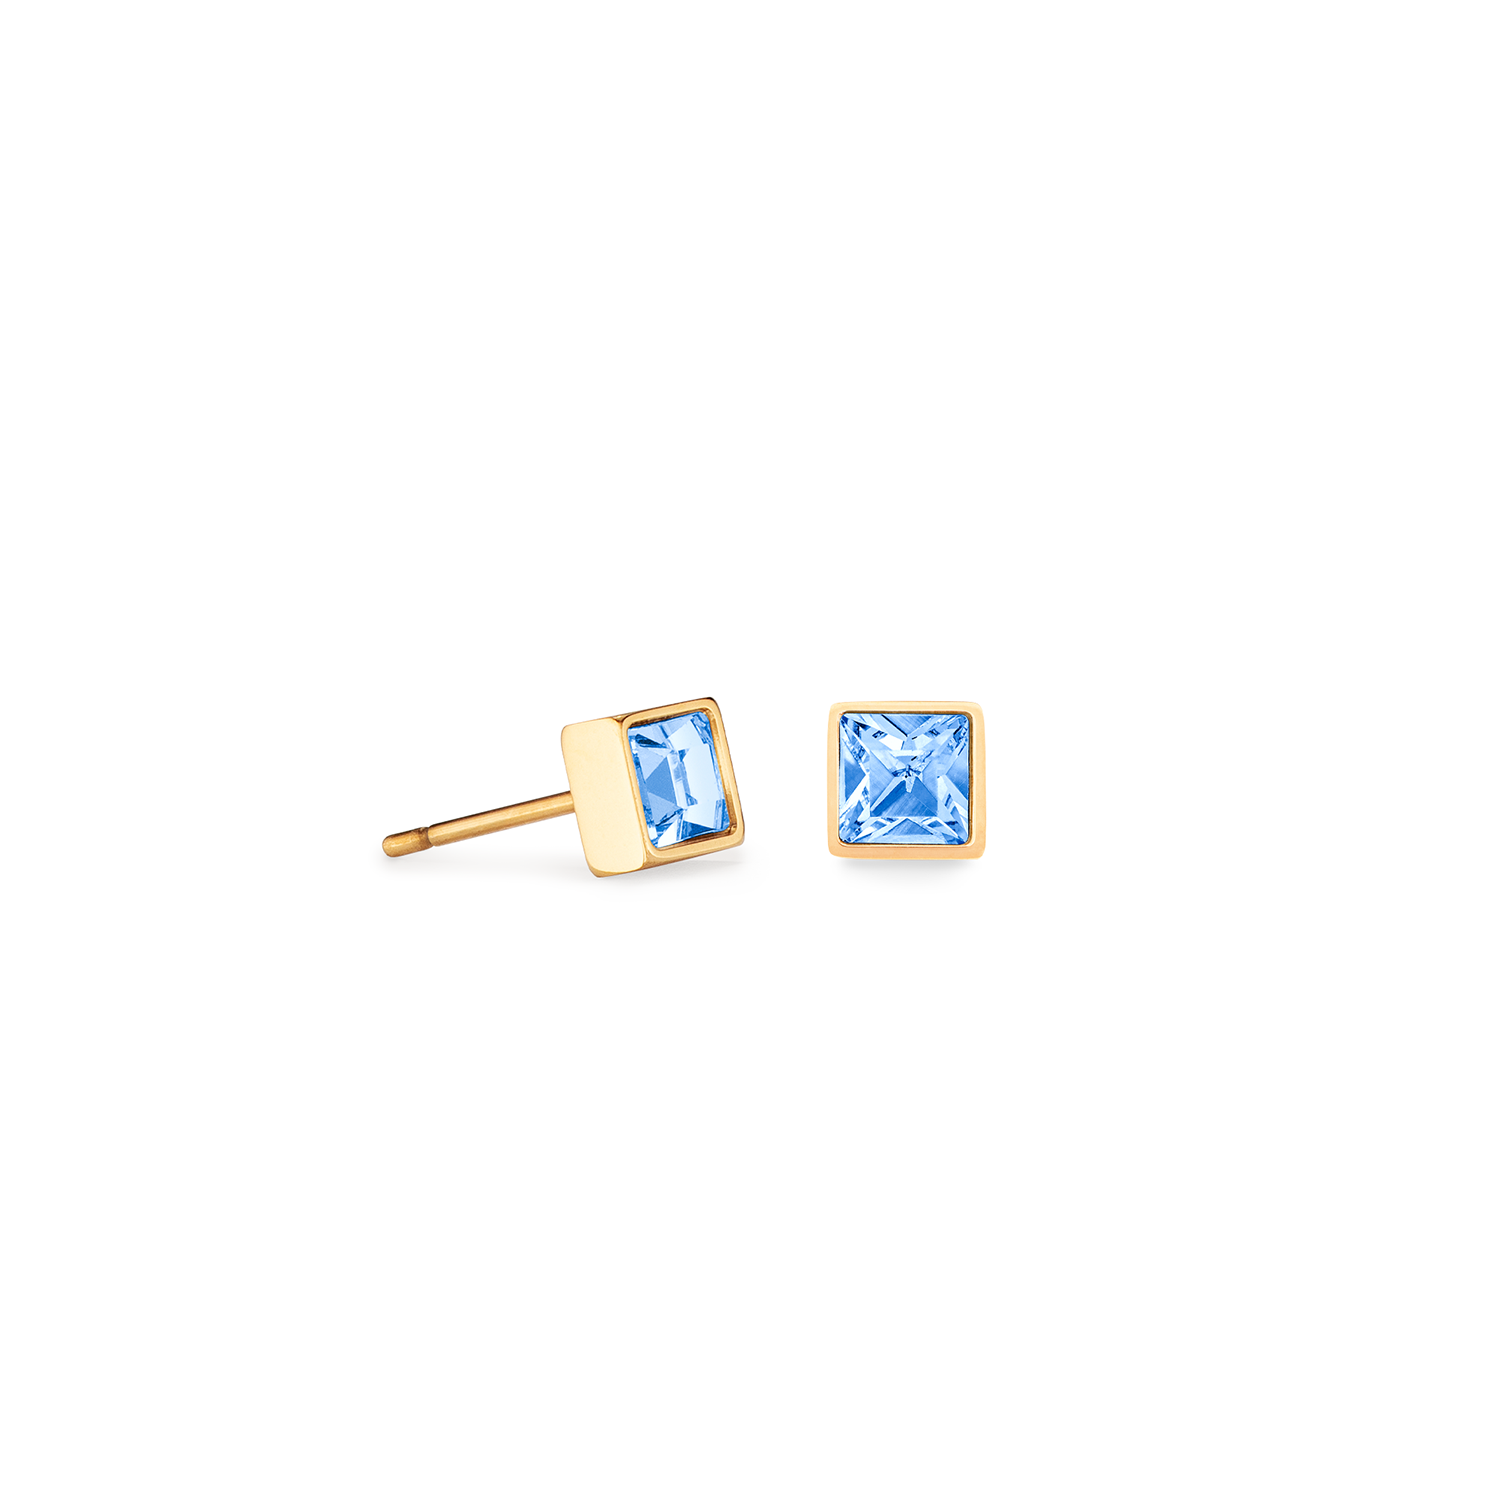 Brilliant Square Small Stud Earrings with Crystals 0501/21_0755 - Blue